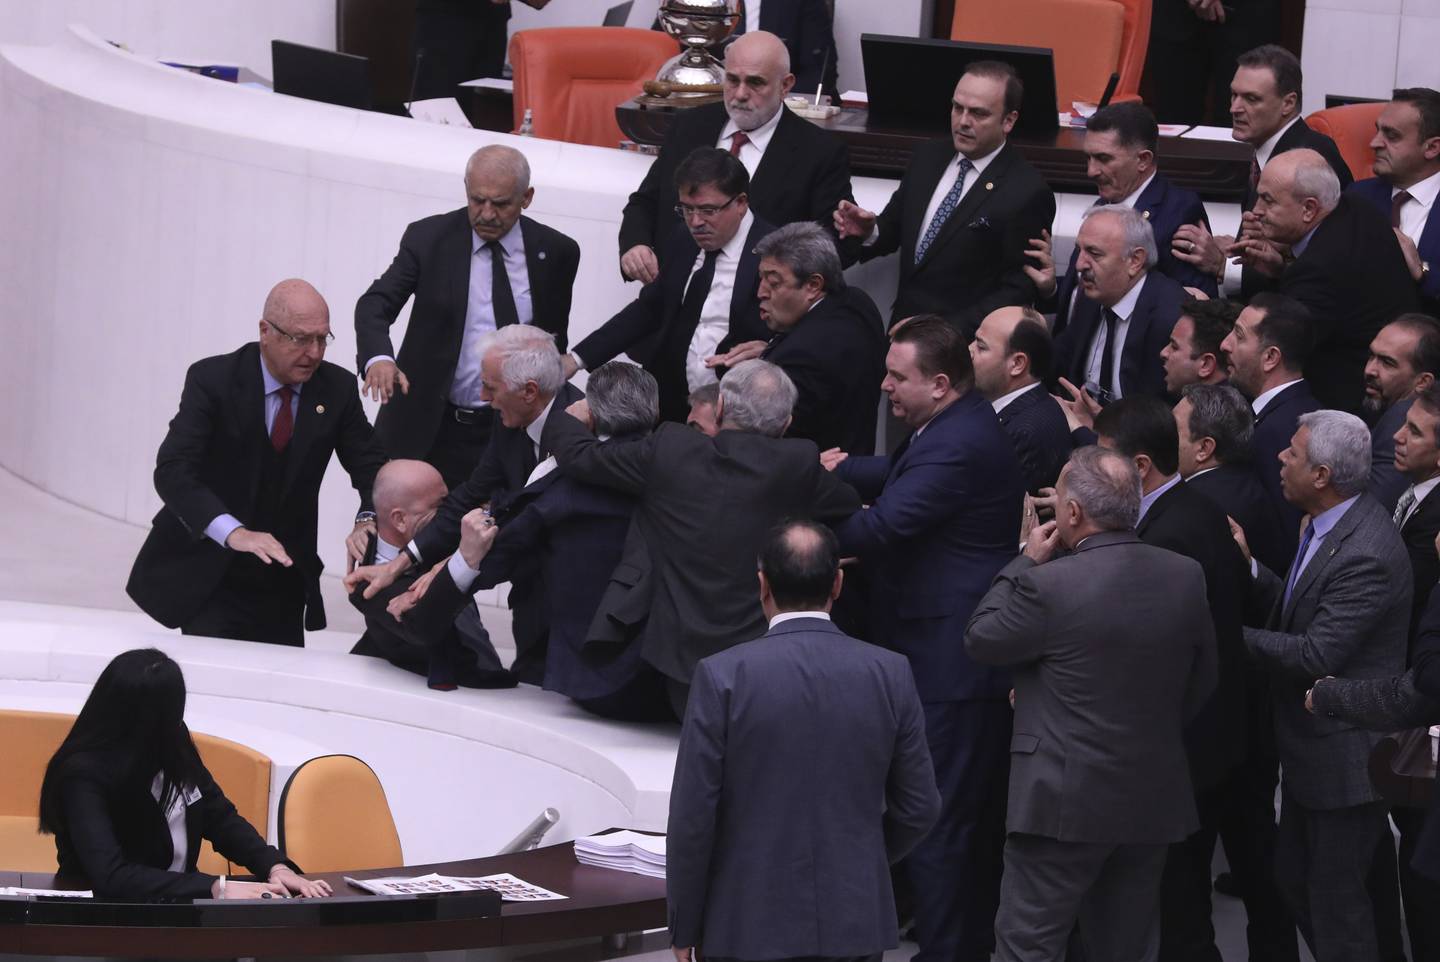 Politicians push each other in the Turkish Parliament in Ankara on Tuesday. AP